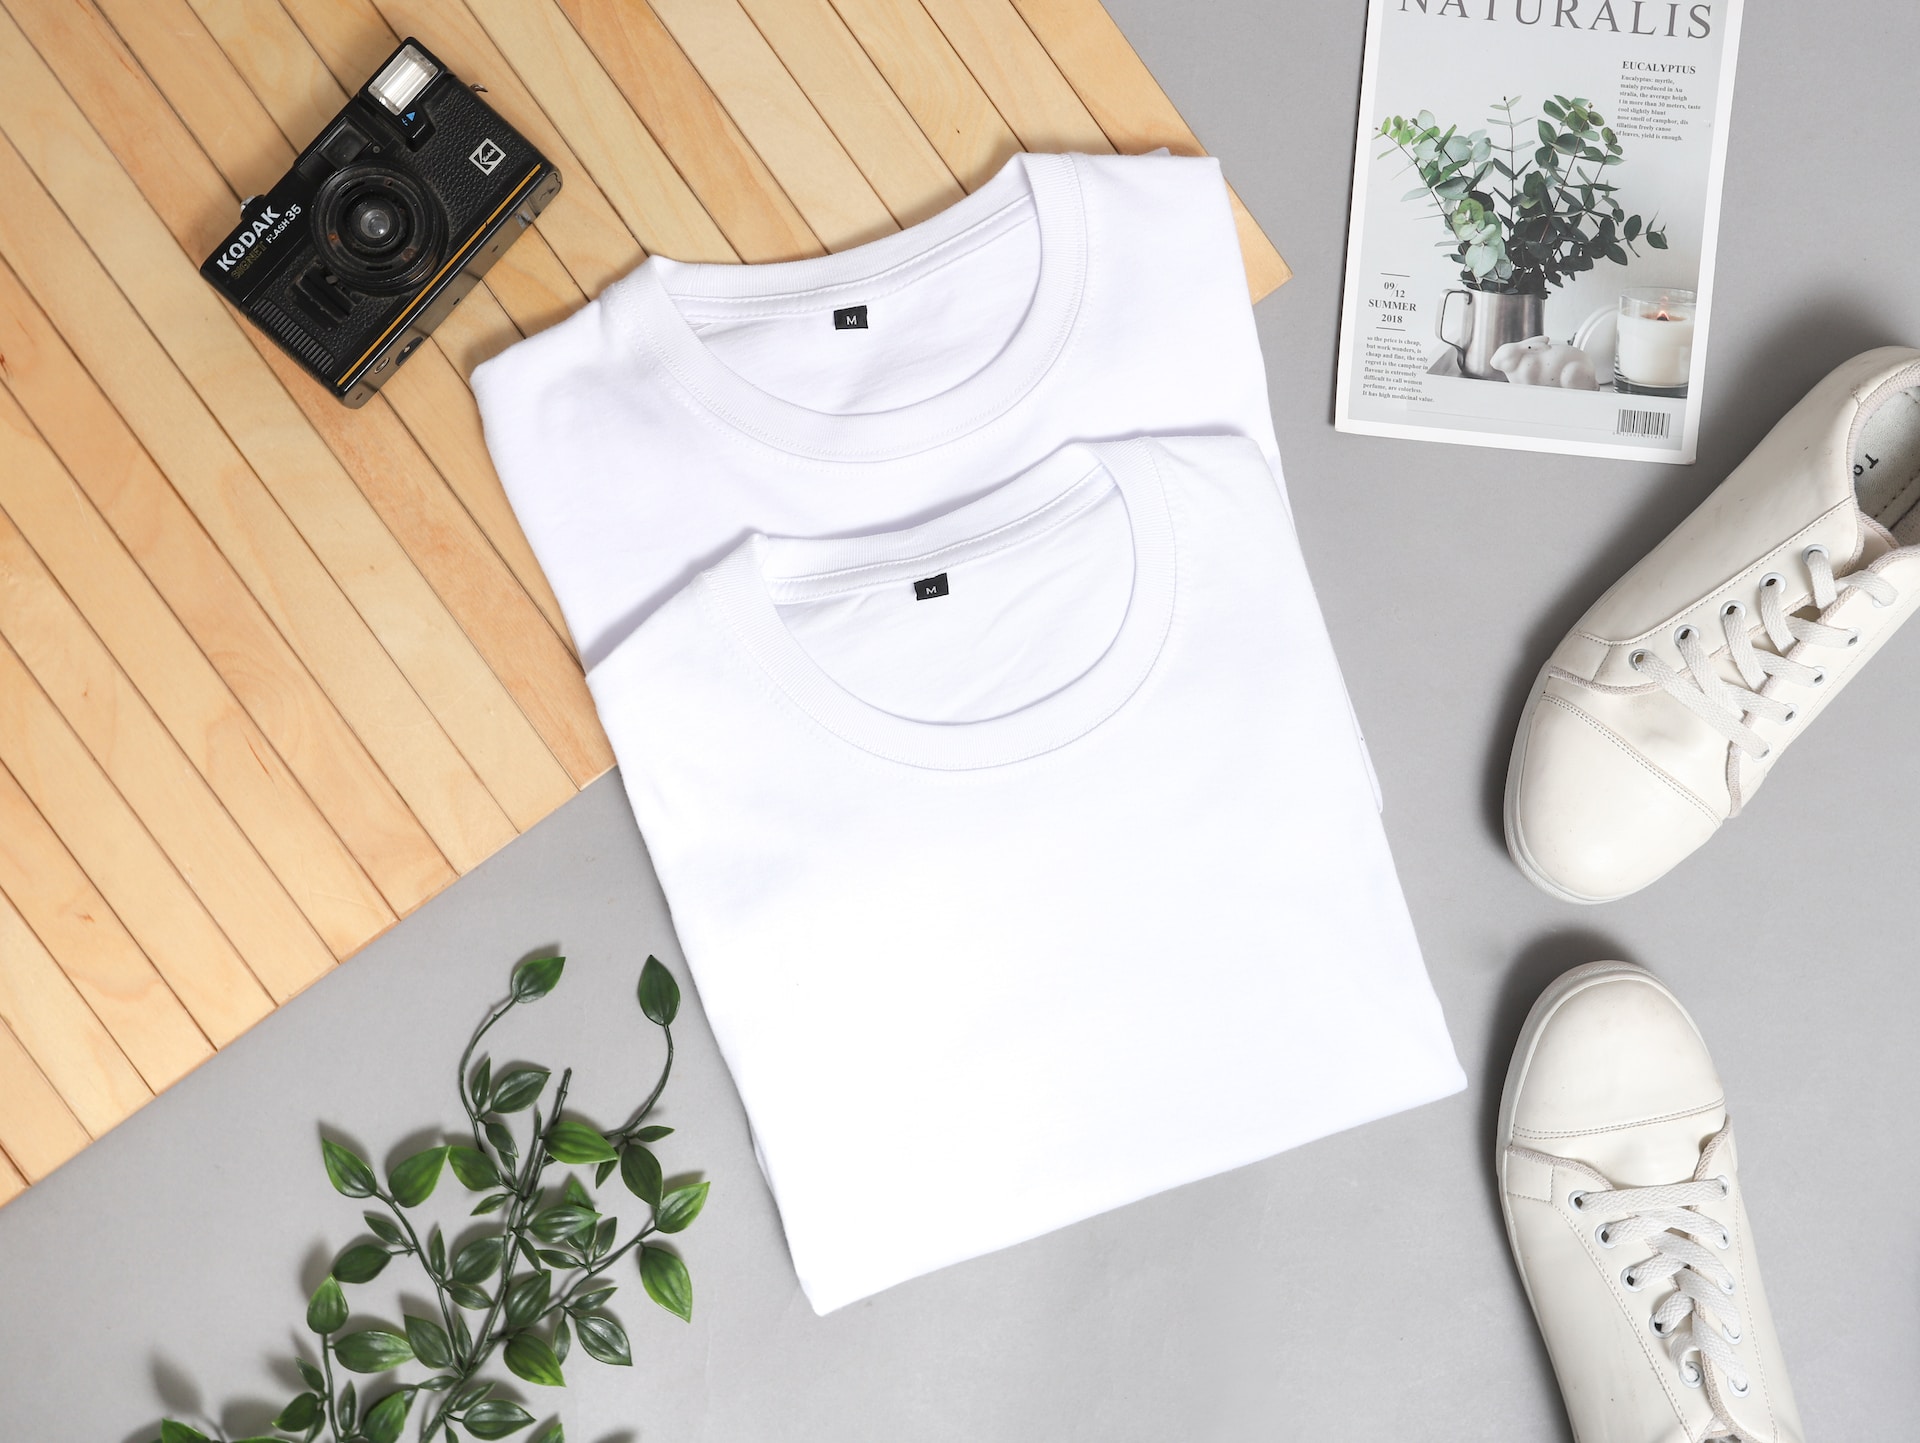 folded t-shirts, sneakers, plant,magazine and camera